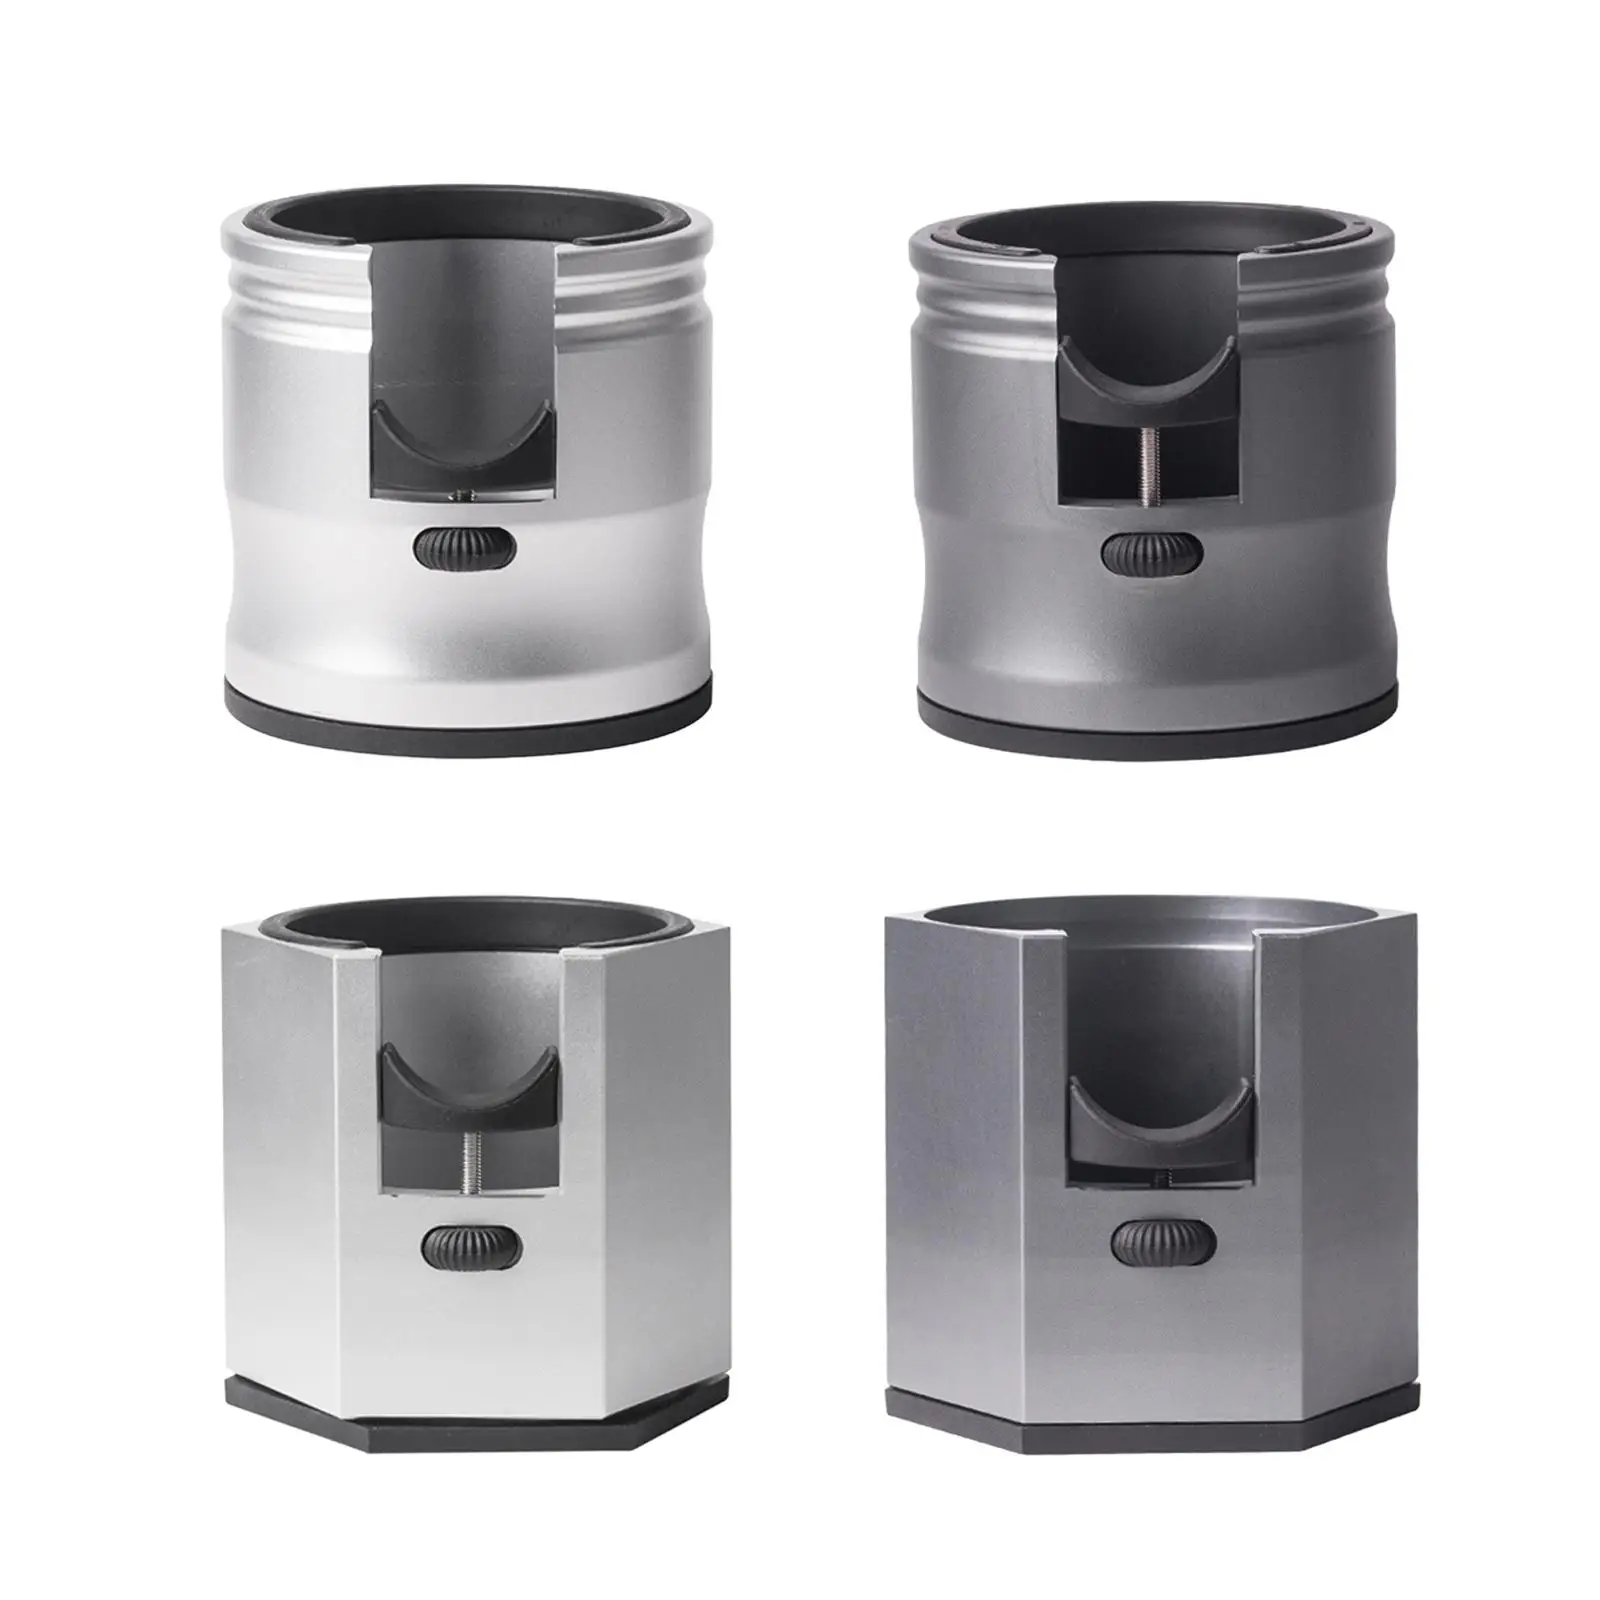 Aluminum Alloy Portafilter Stand Holder, Coffee Tamper Holder with Non Slip Base for Cafe